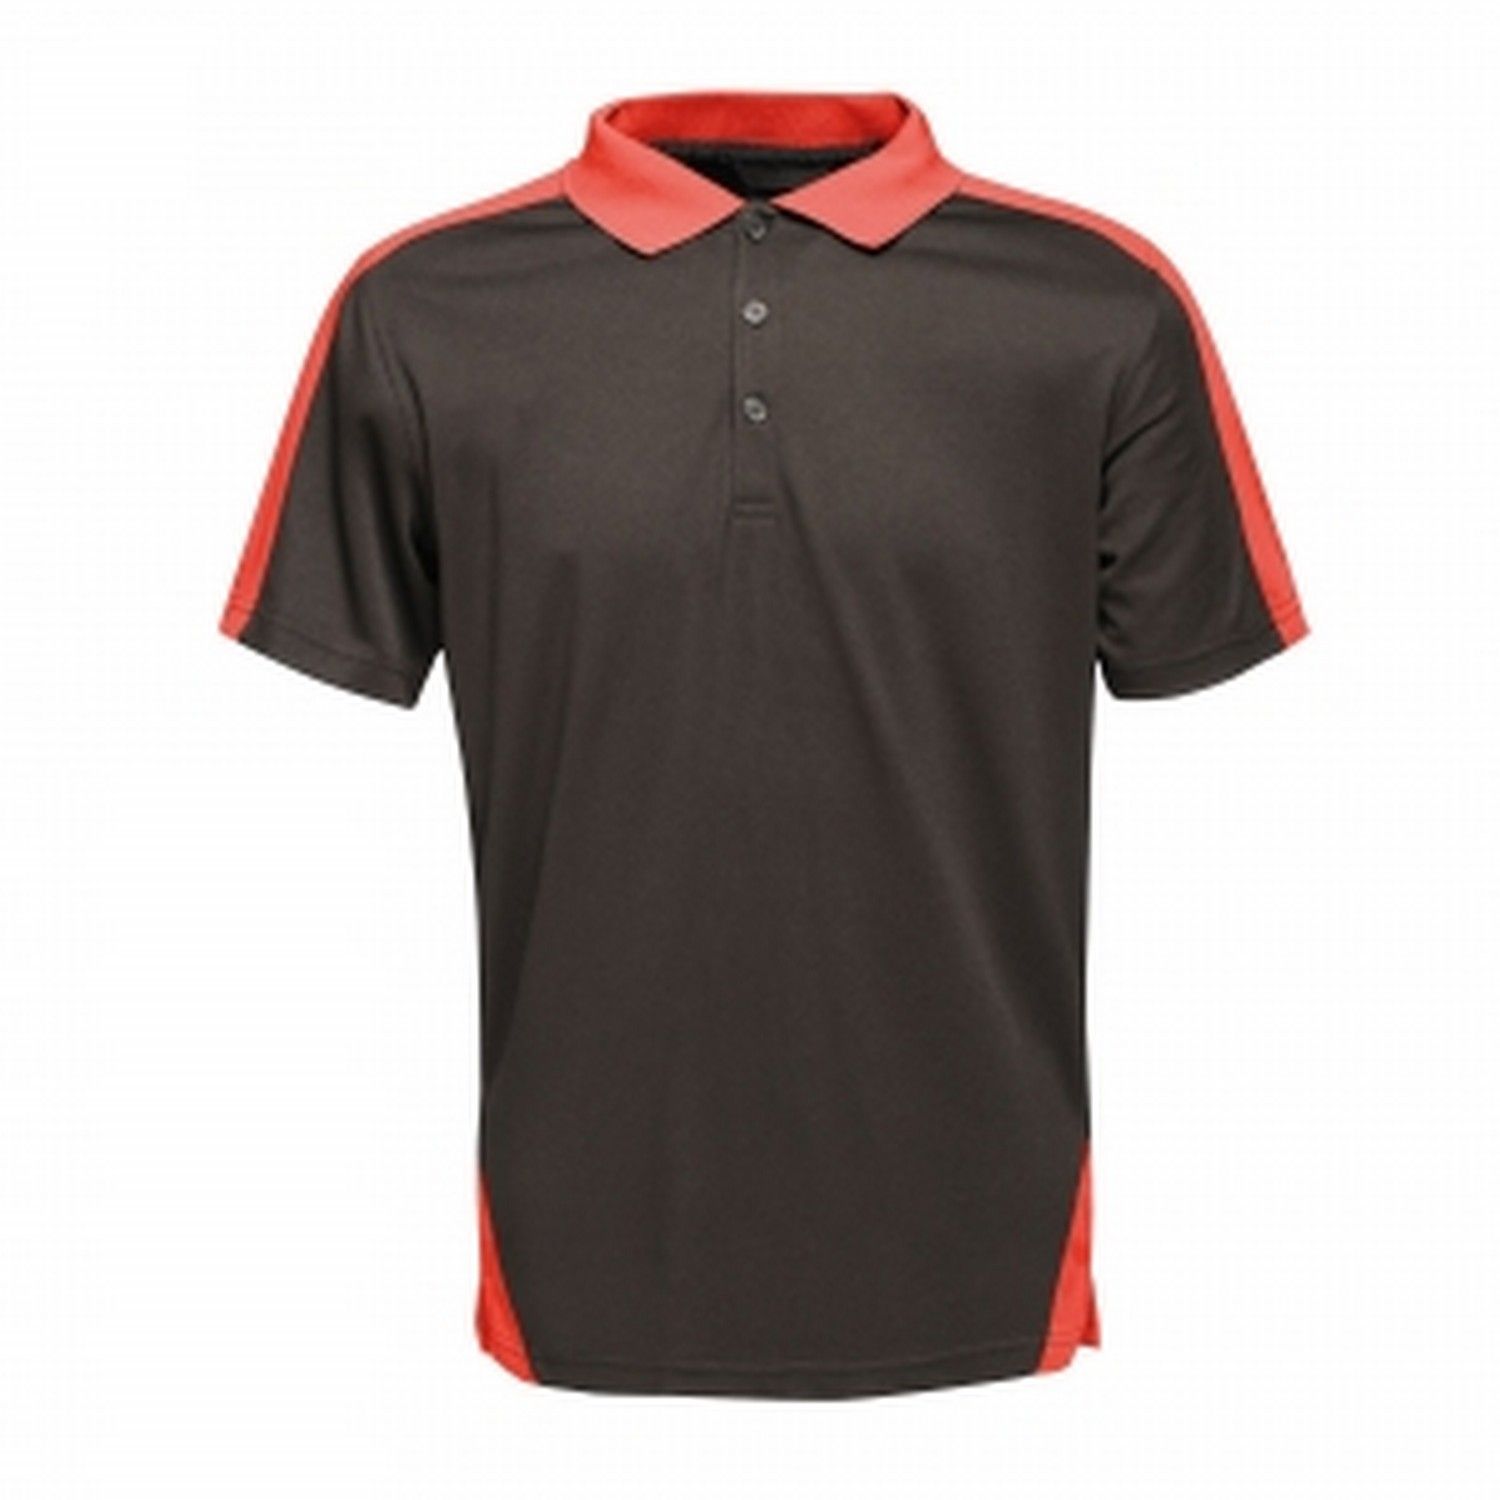 Regatta Mens Contrast Coolweave Polo Shirt (Black/Classic Red)